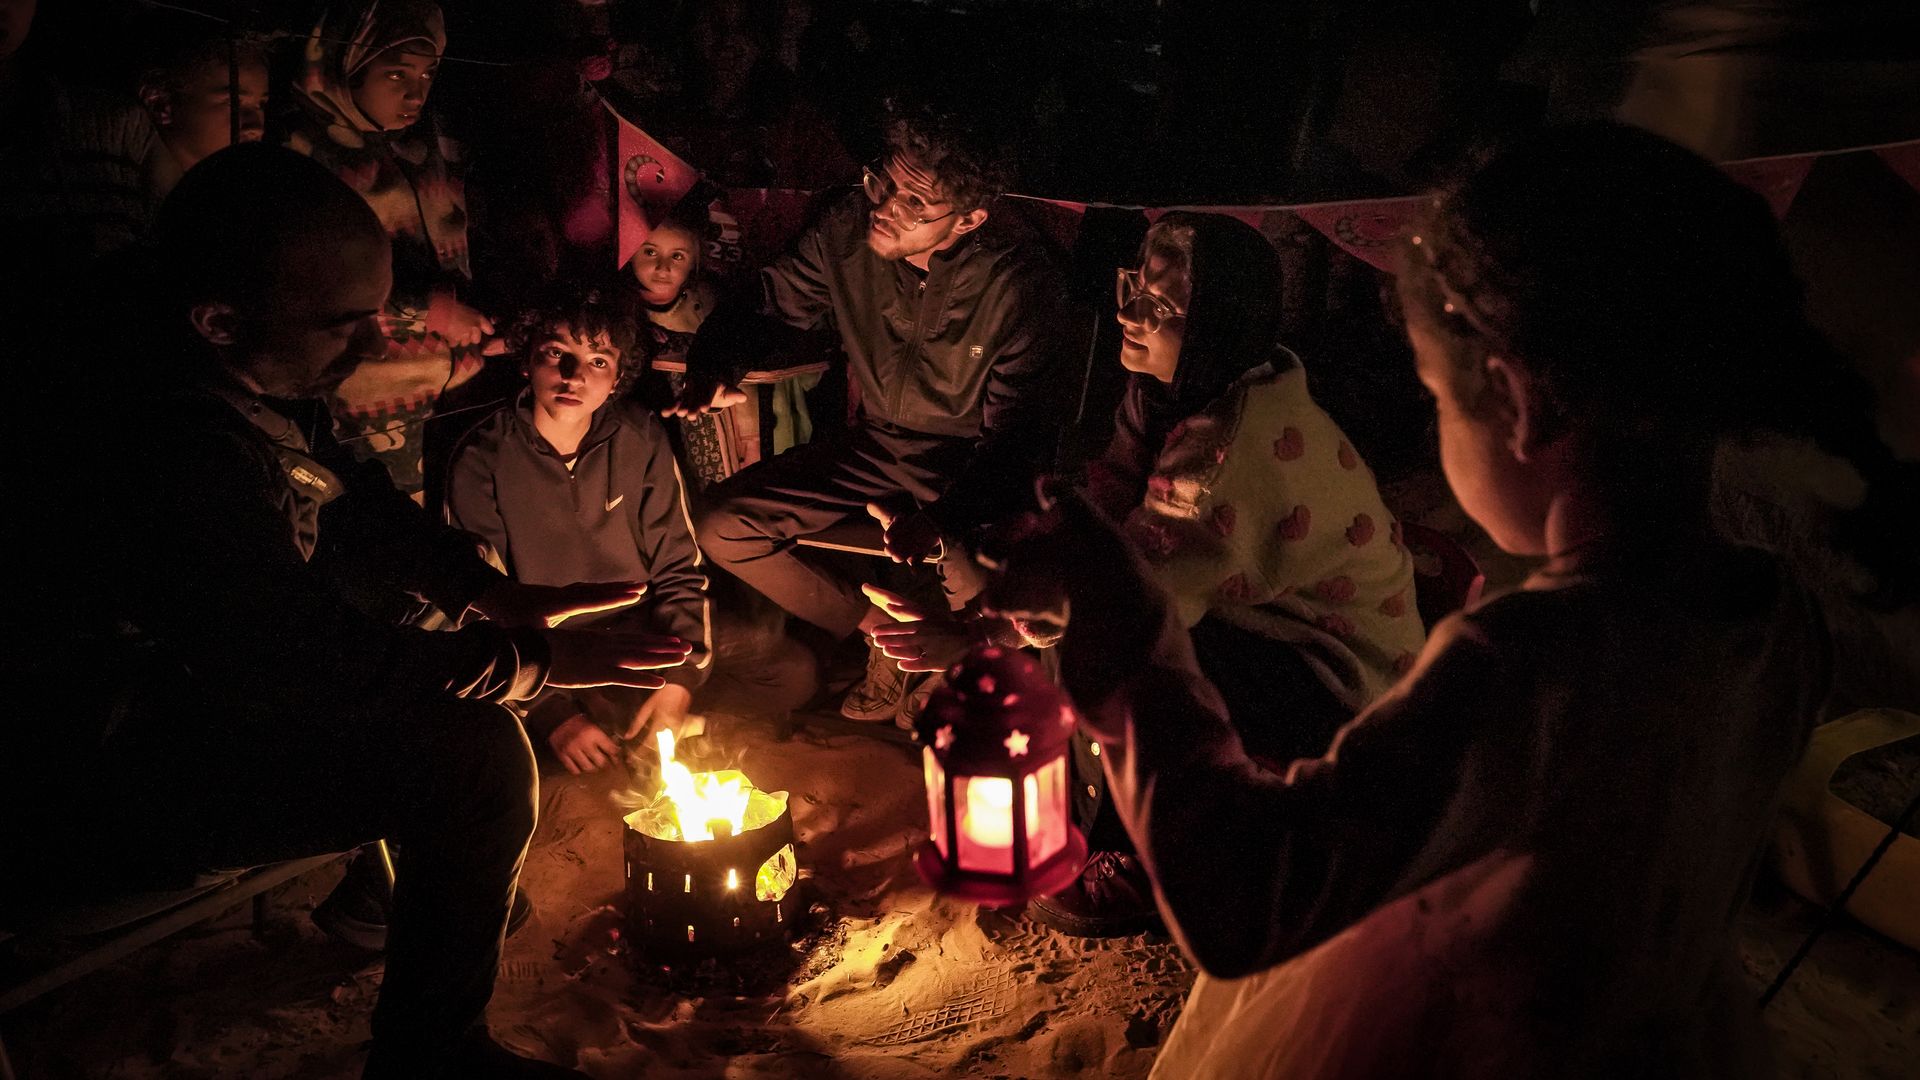 A young child is holding a lantern near a group of Palestinians people huddled around a fire. 